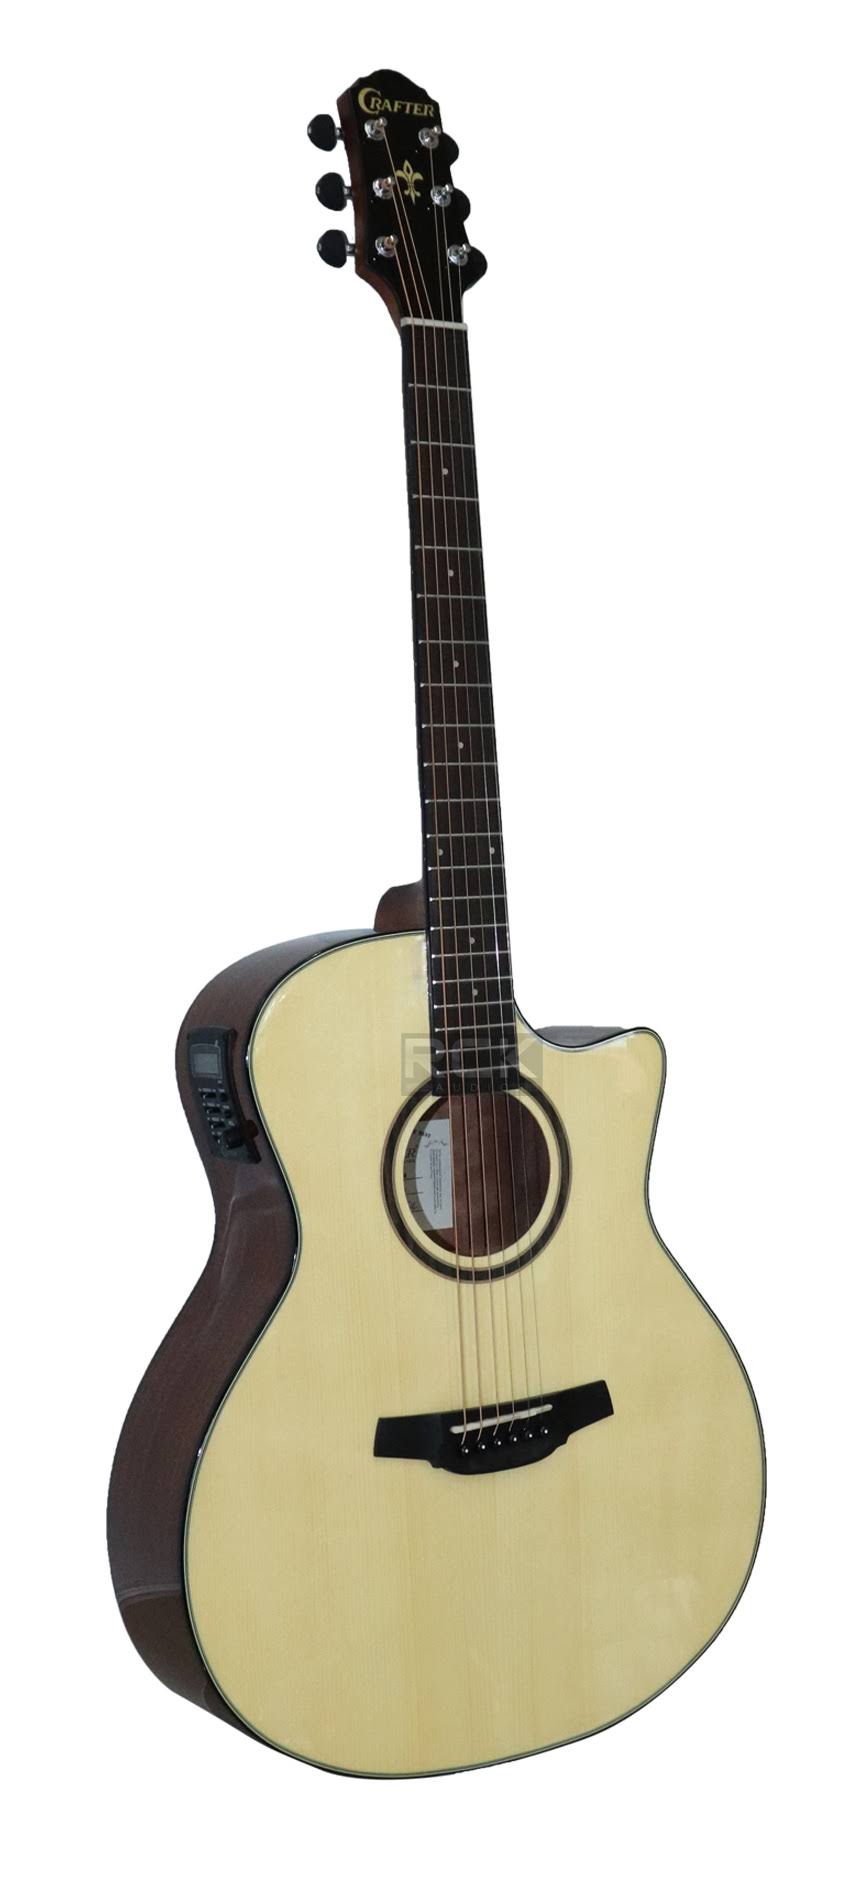 Crafter HG250-CE-N Silver